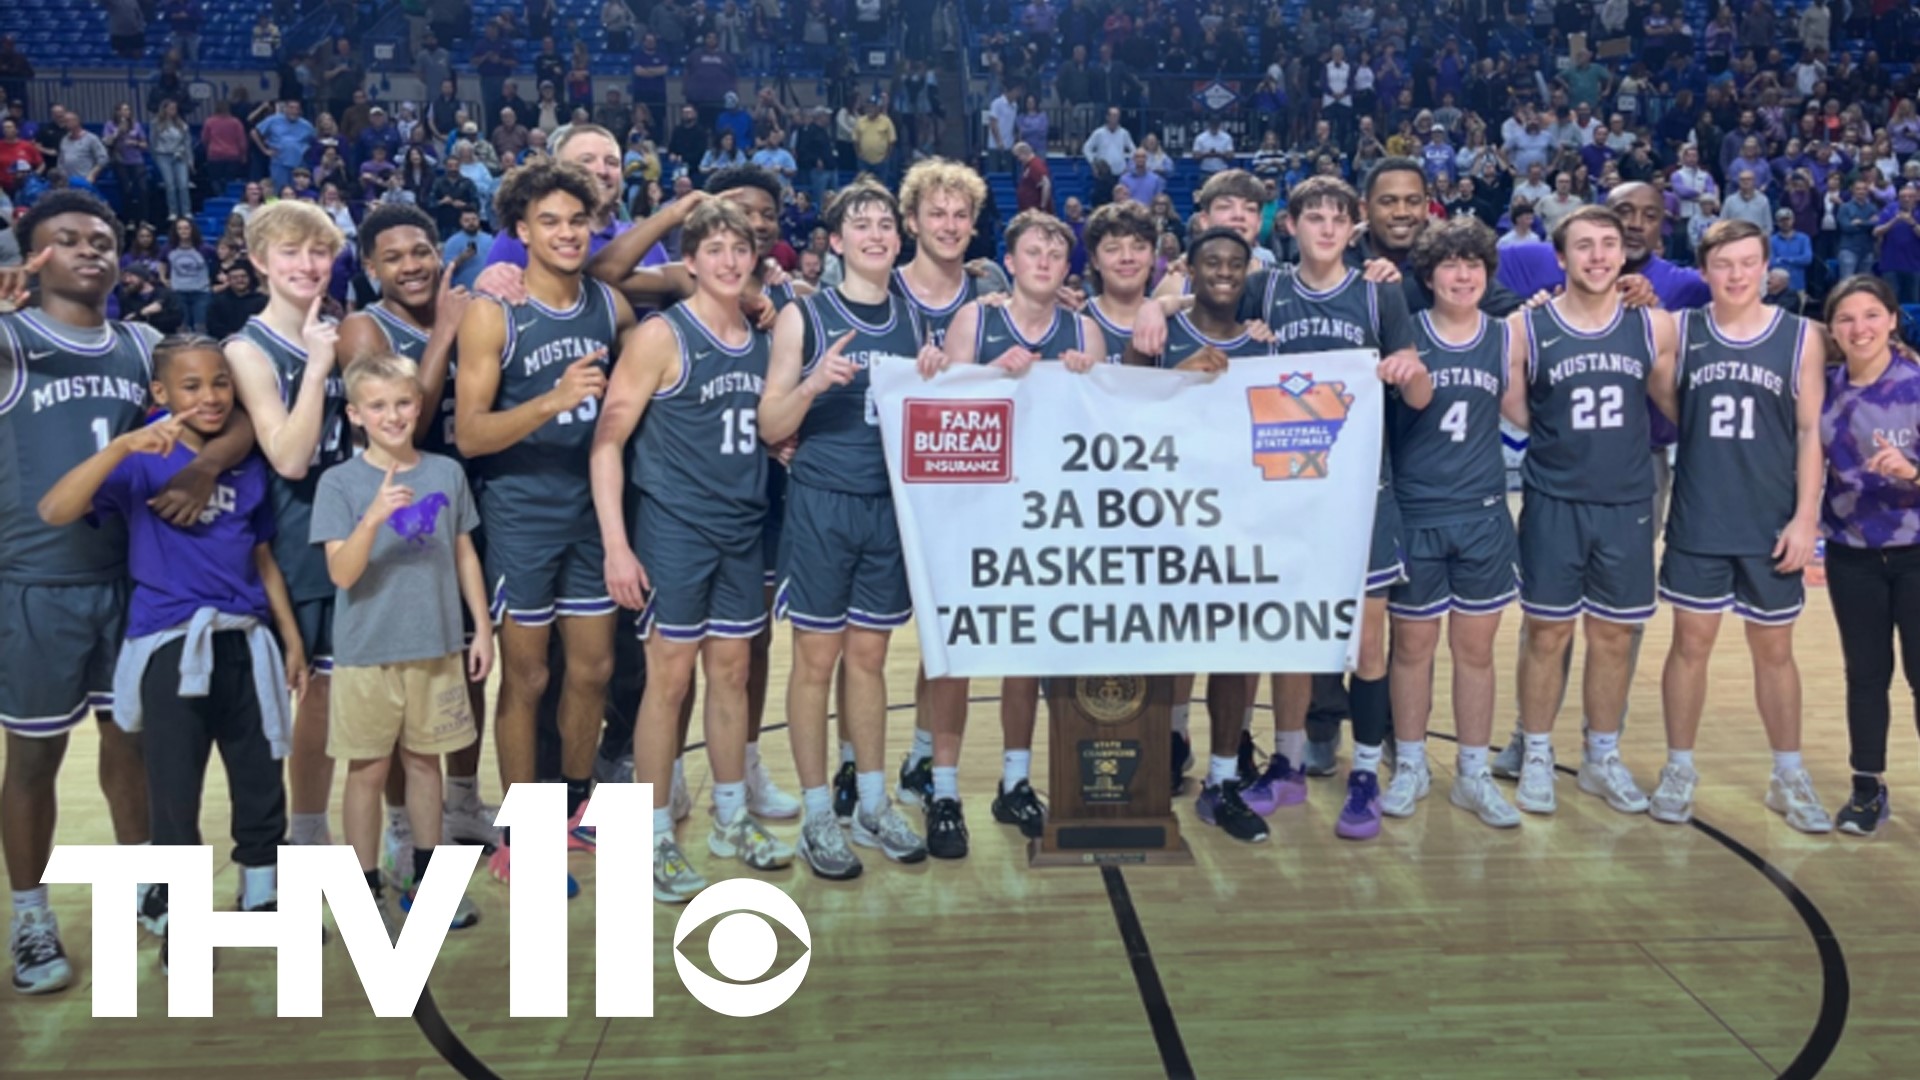 Lane Baxter and Sam Maddox scored 16 points each to help Central Arkansas Christian win the Class 3A boys basketball state championship.